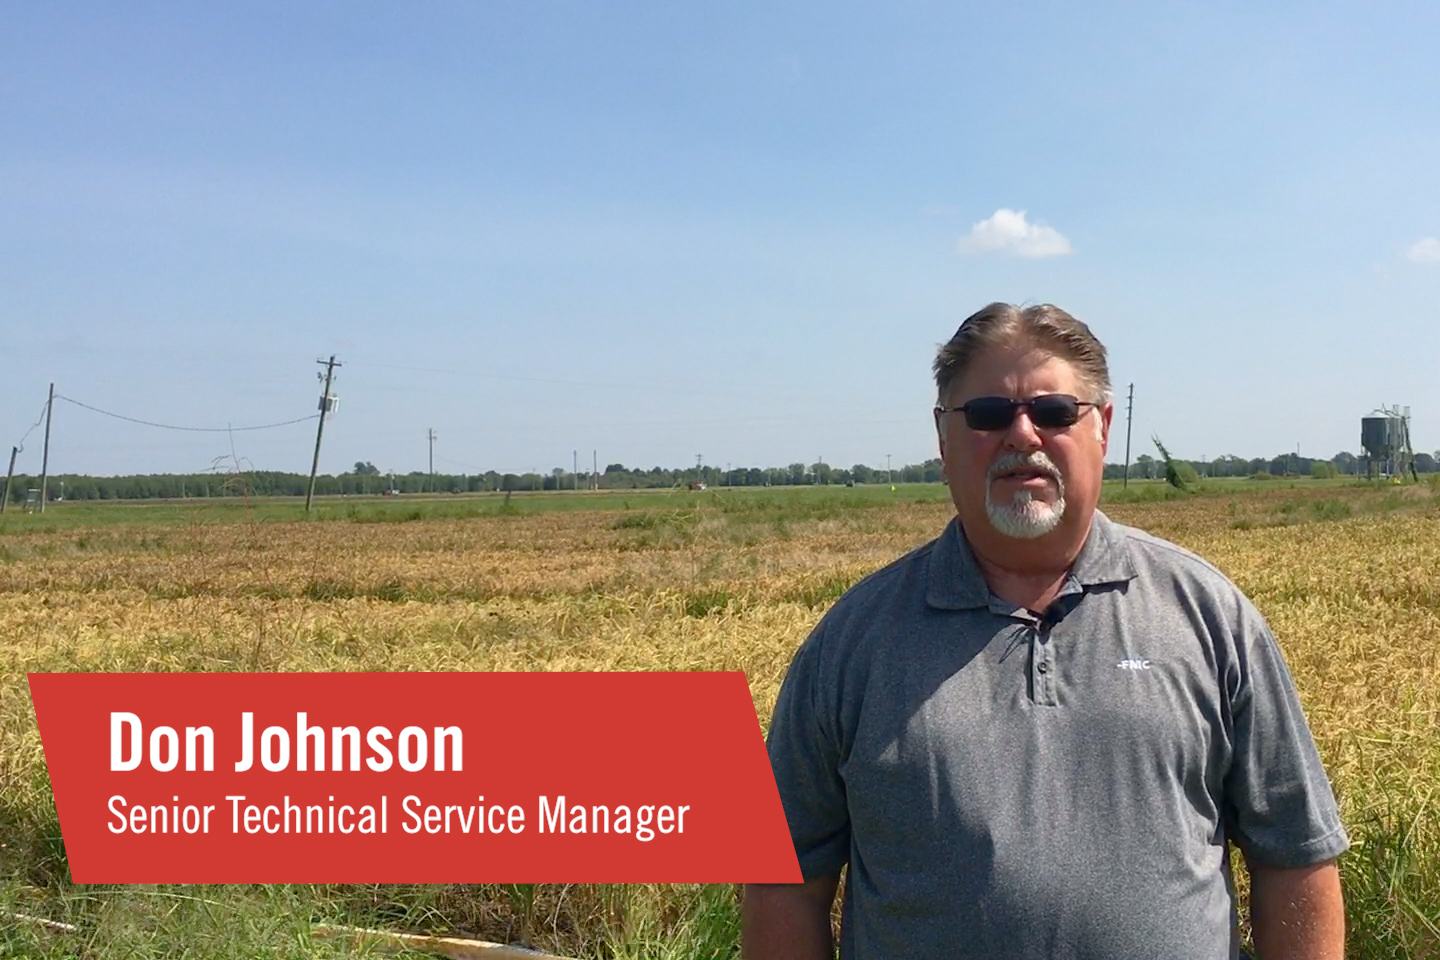  FMC Senior Technical Service Manager Don Johnson explains why Command® 3ME microencapsulated herbicide is the top preemergence herbicide for control of tough weeds like barnyardgrass and sprangletop across the Mid-South.